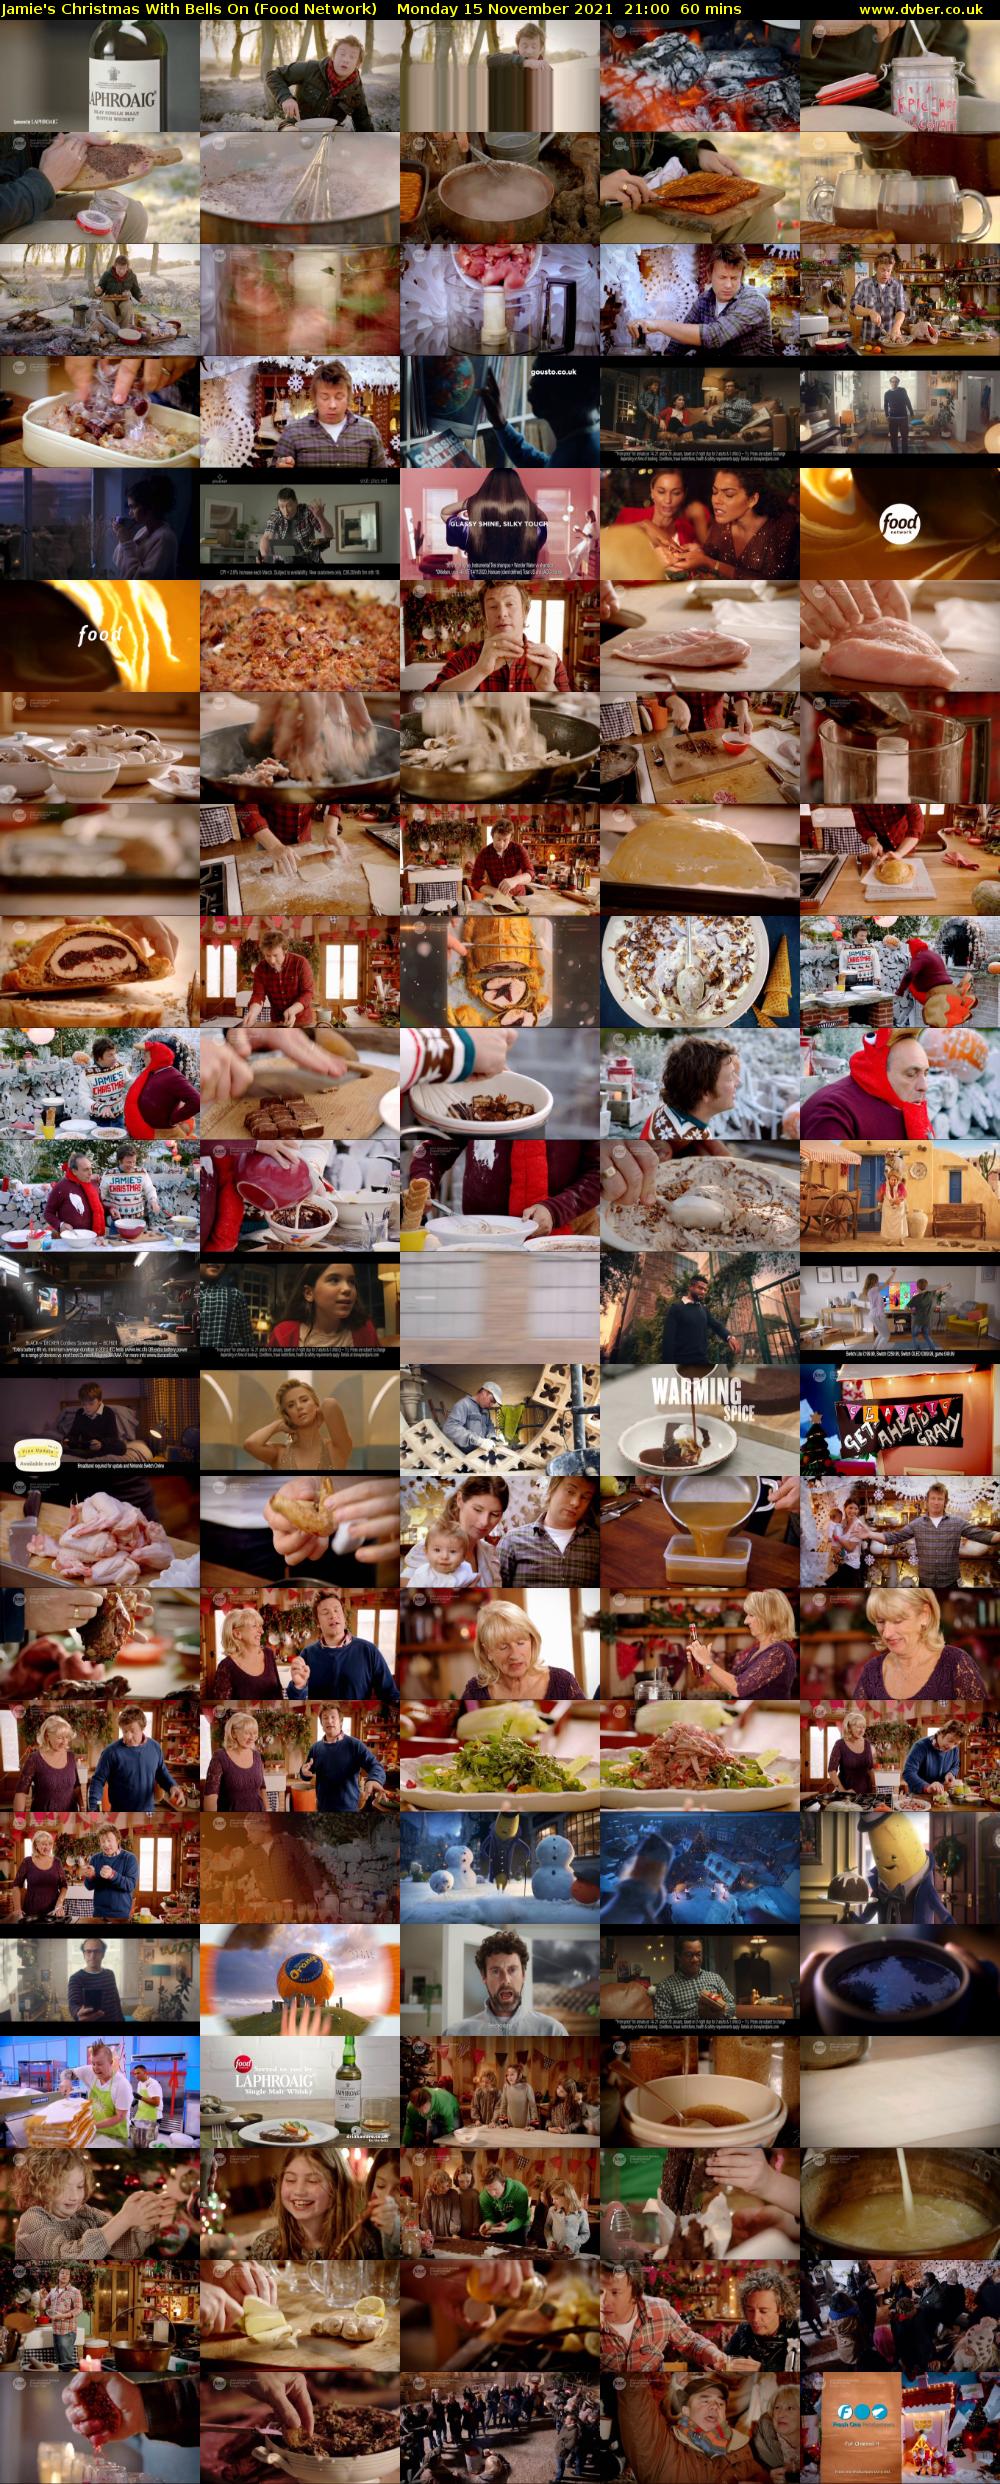 Jamie's Christmas With Bells On (Food Network) Monday 15 November 2021 21:00 - 22:00